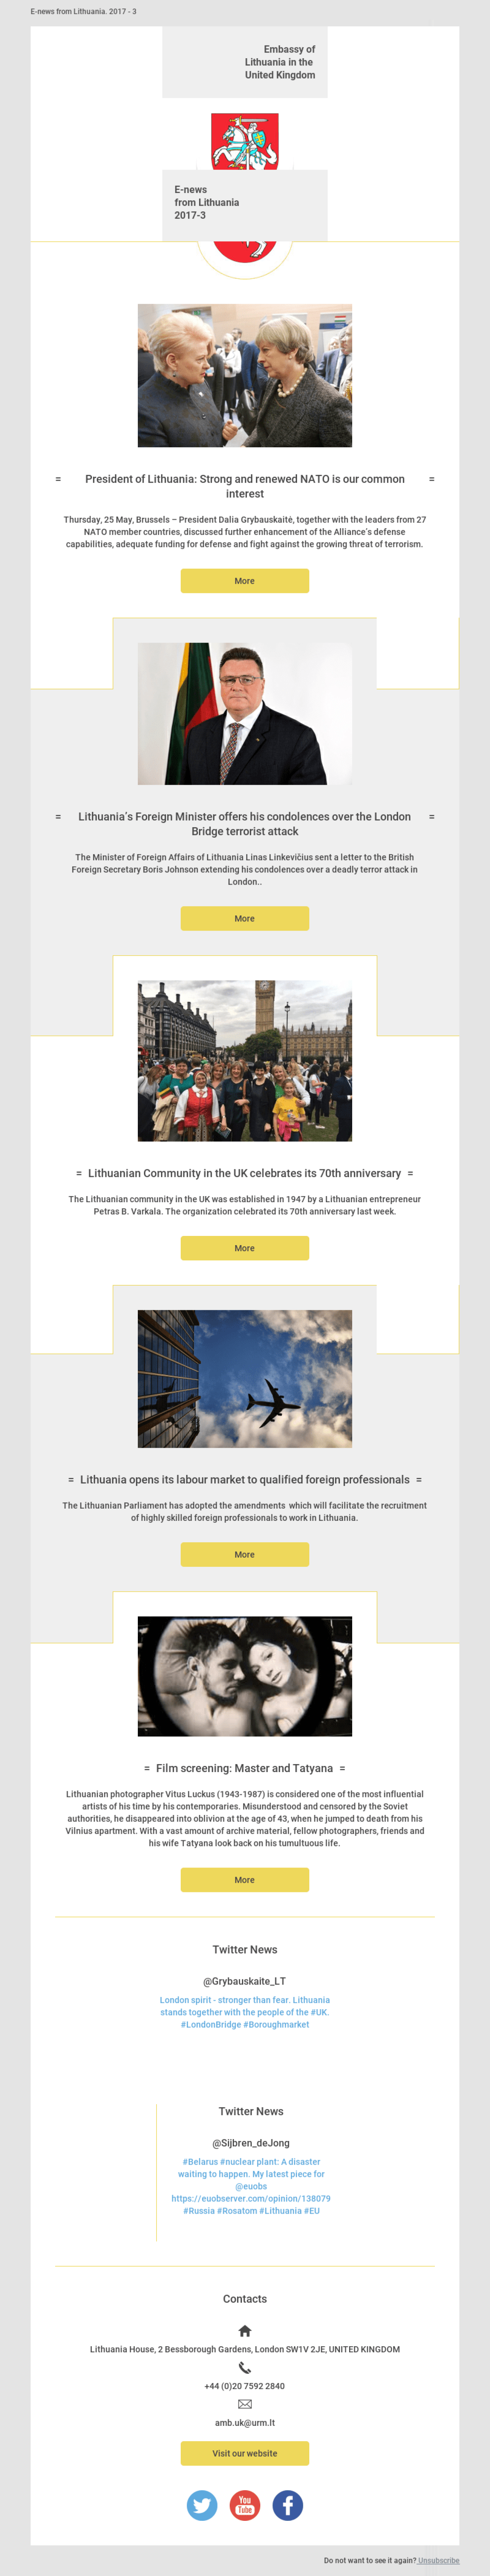 Embassy of Lithuania custom template example - Made with MailerLite